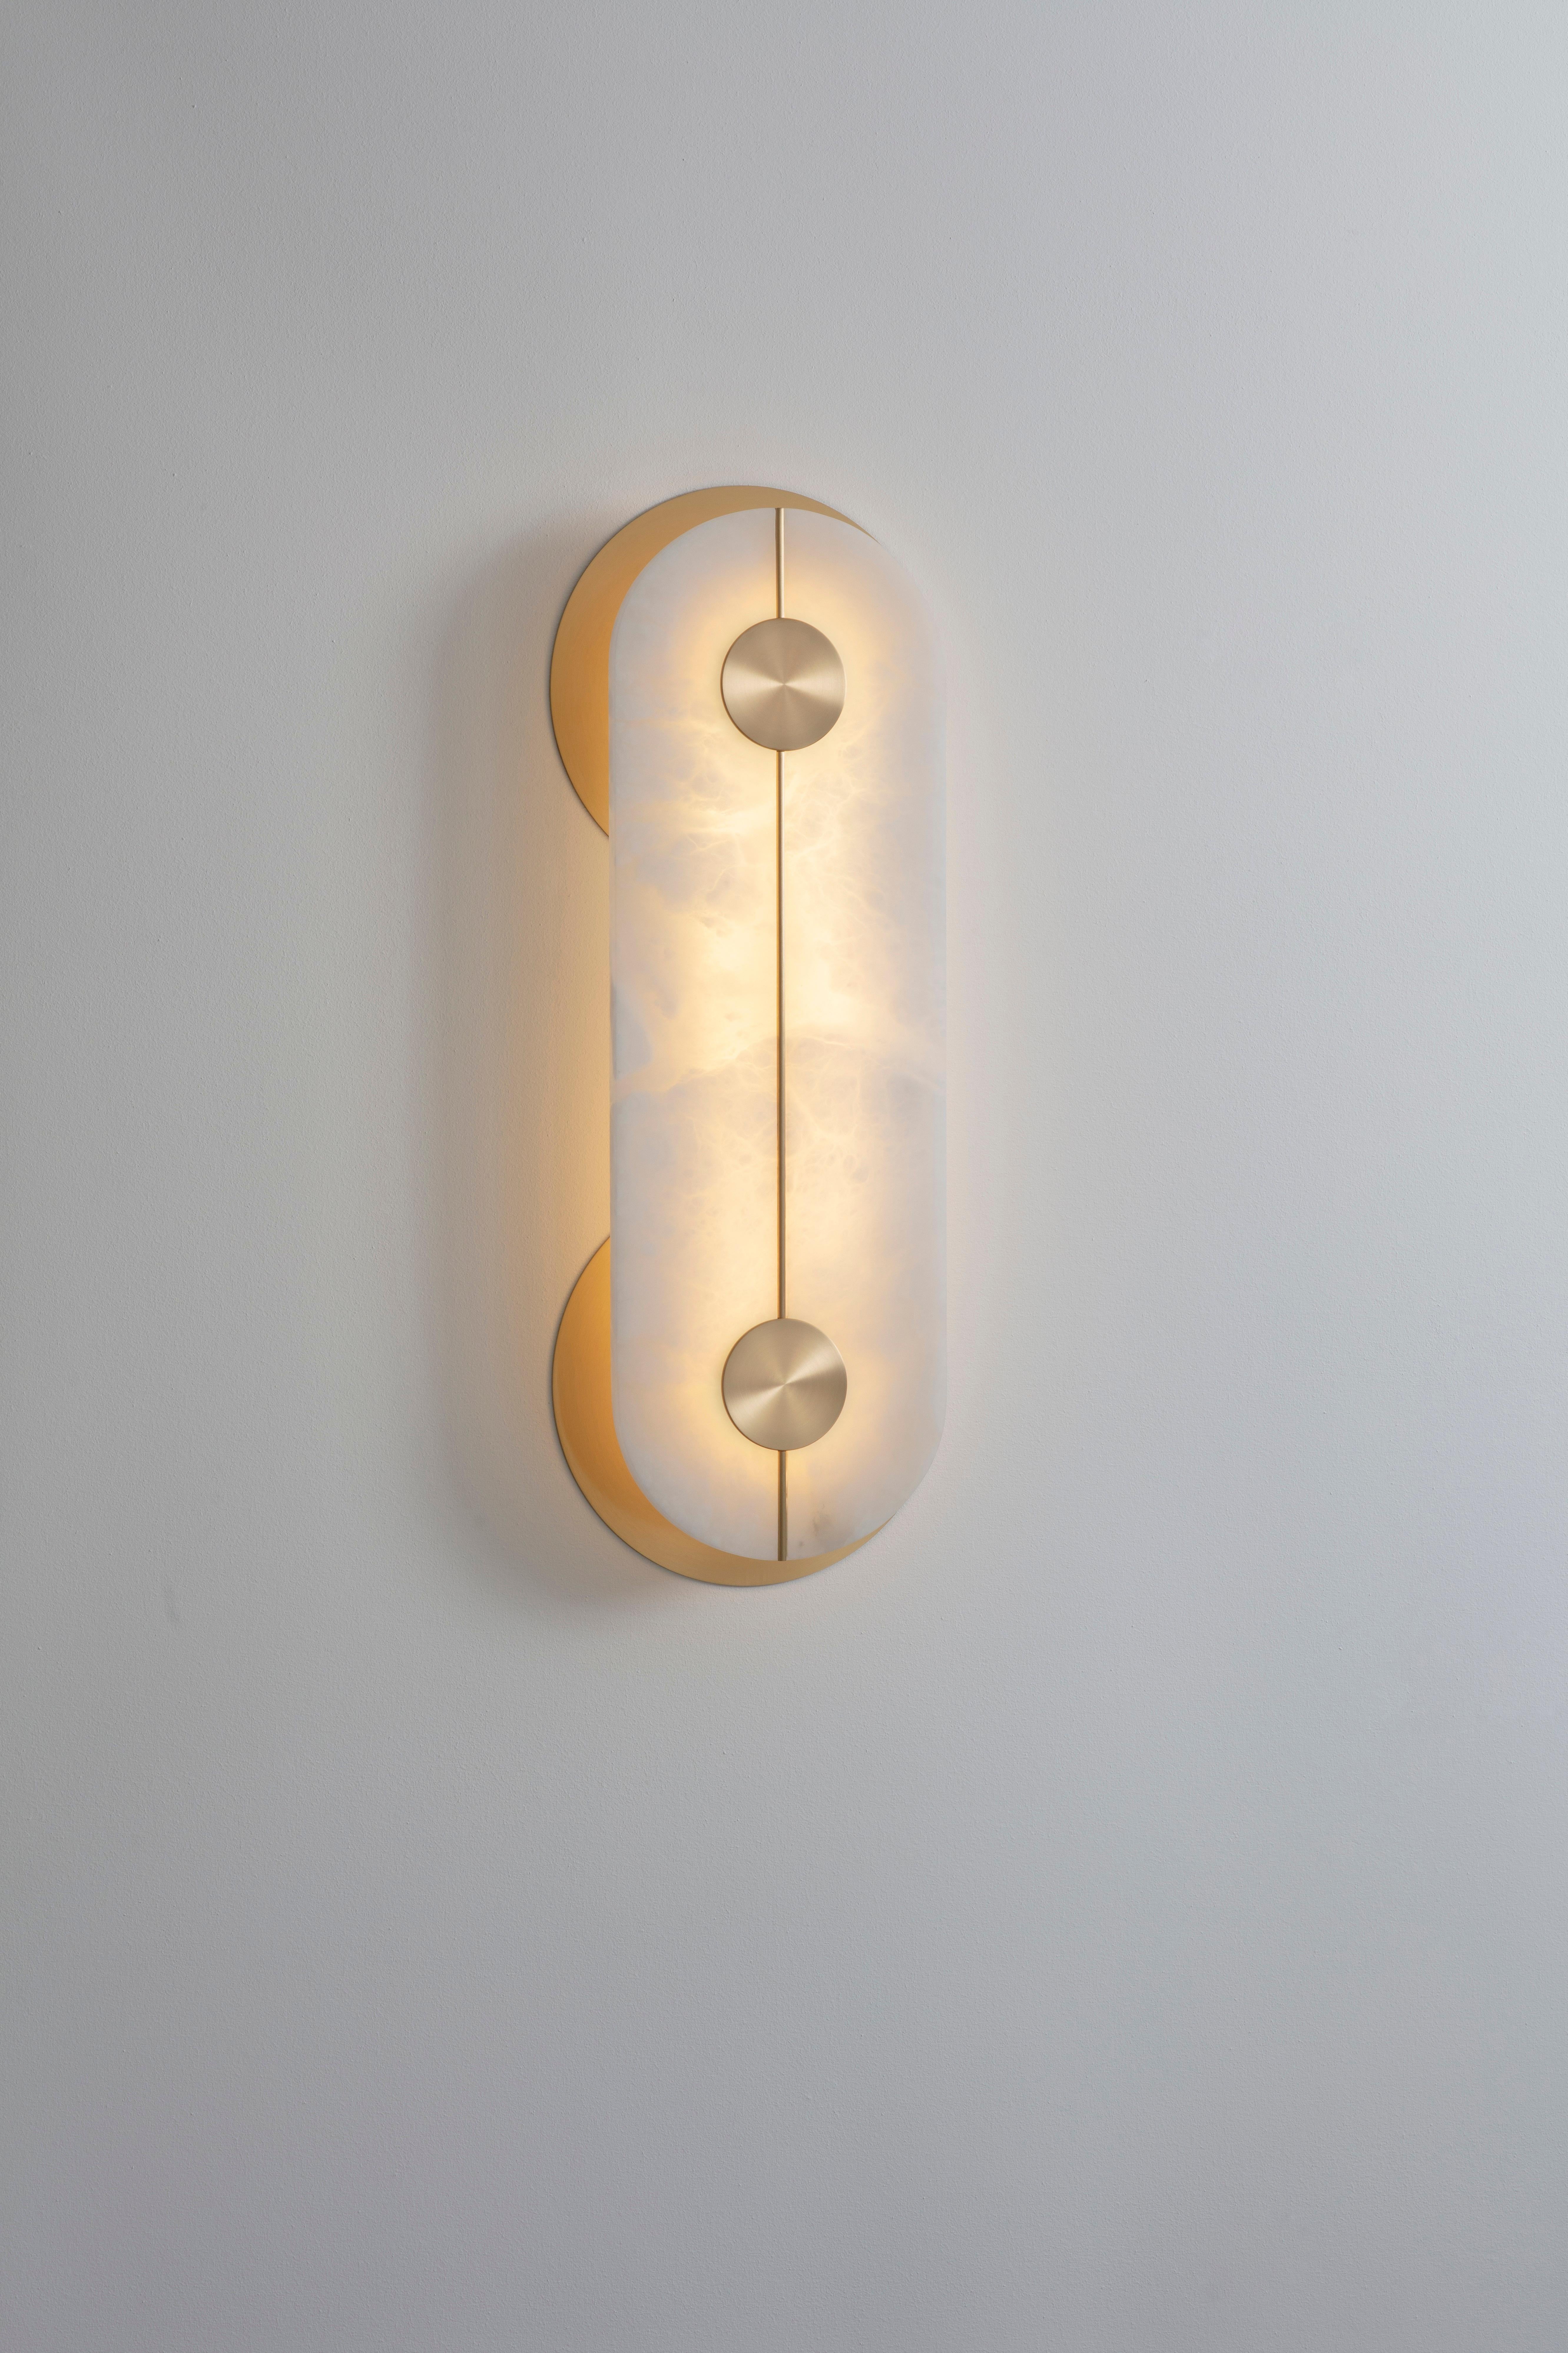 Brace wall light large by Bert Frank
Dimensions: 64 x 24 x 6.7 cm
Materials: Brass 

Available in: Nickel

All our lamps can be wired according to each country. If sold to the USA it will be wired for the USA for instance.

Machined almost